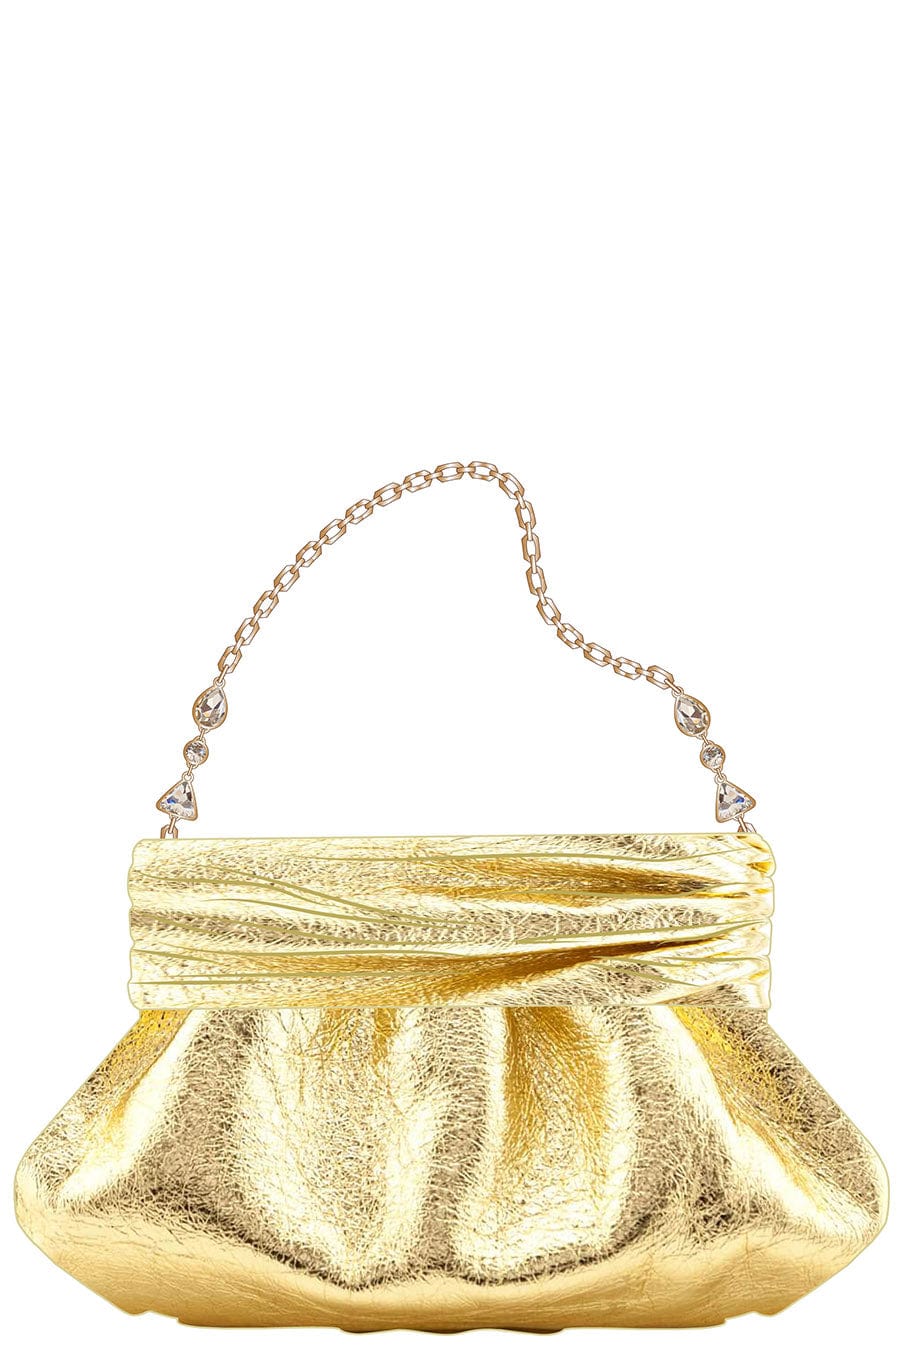 Champagne purse Archives - Sojoee